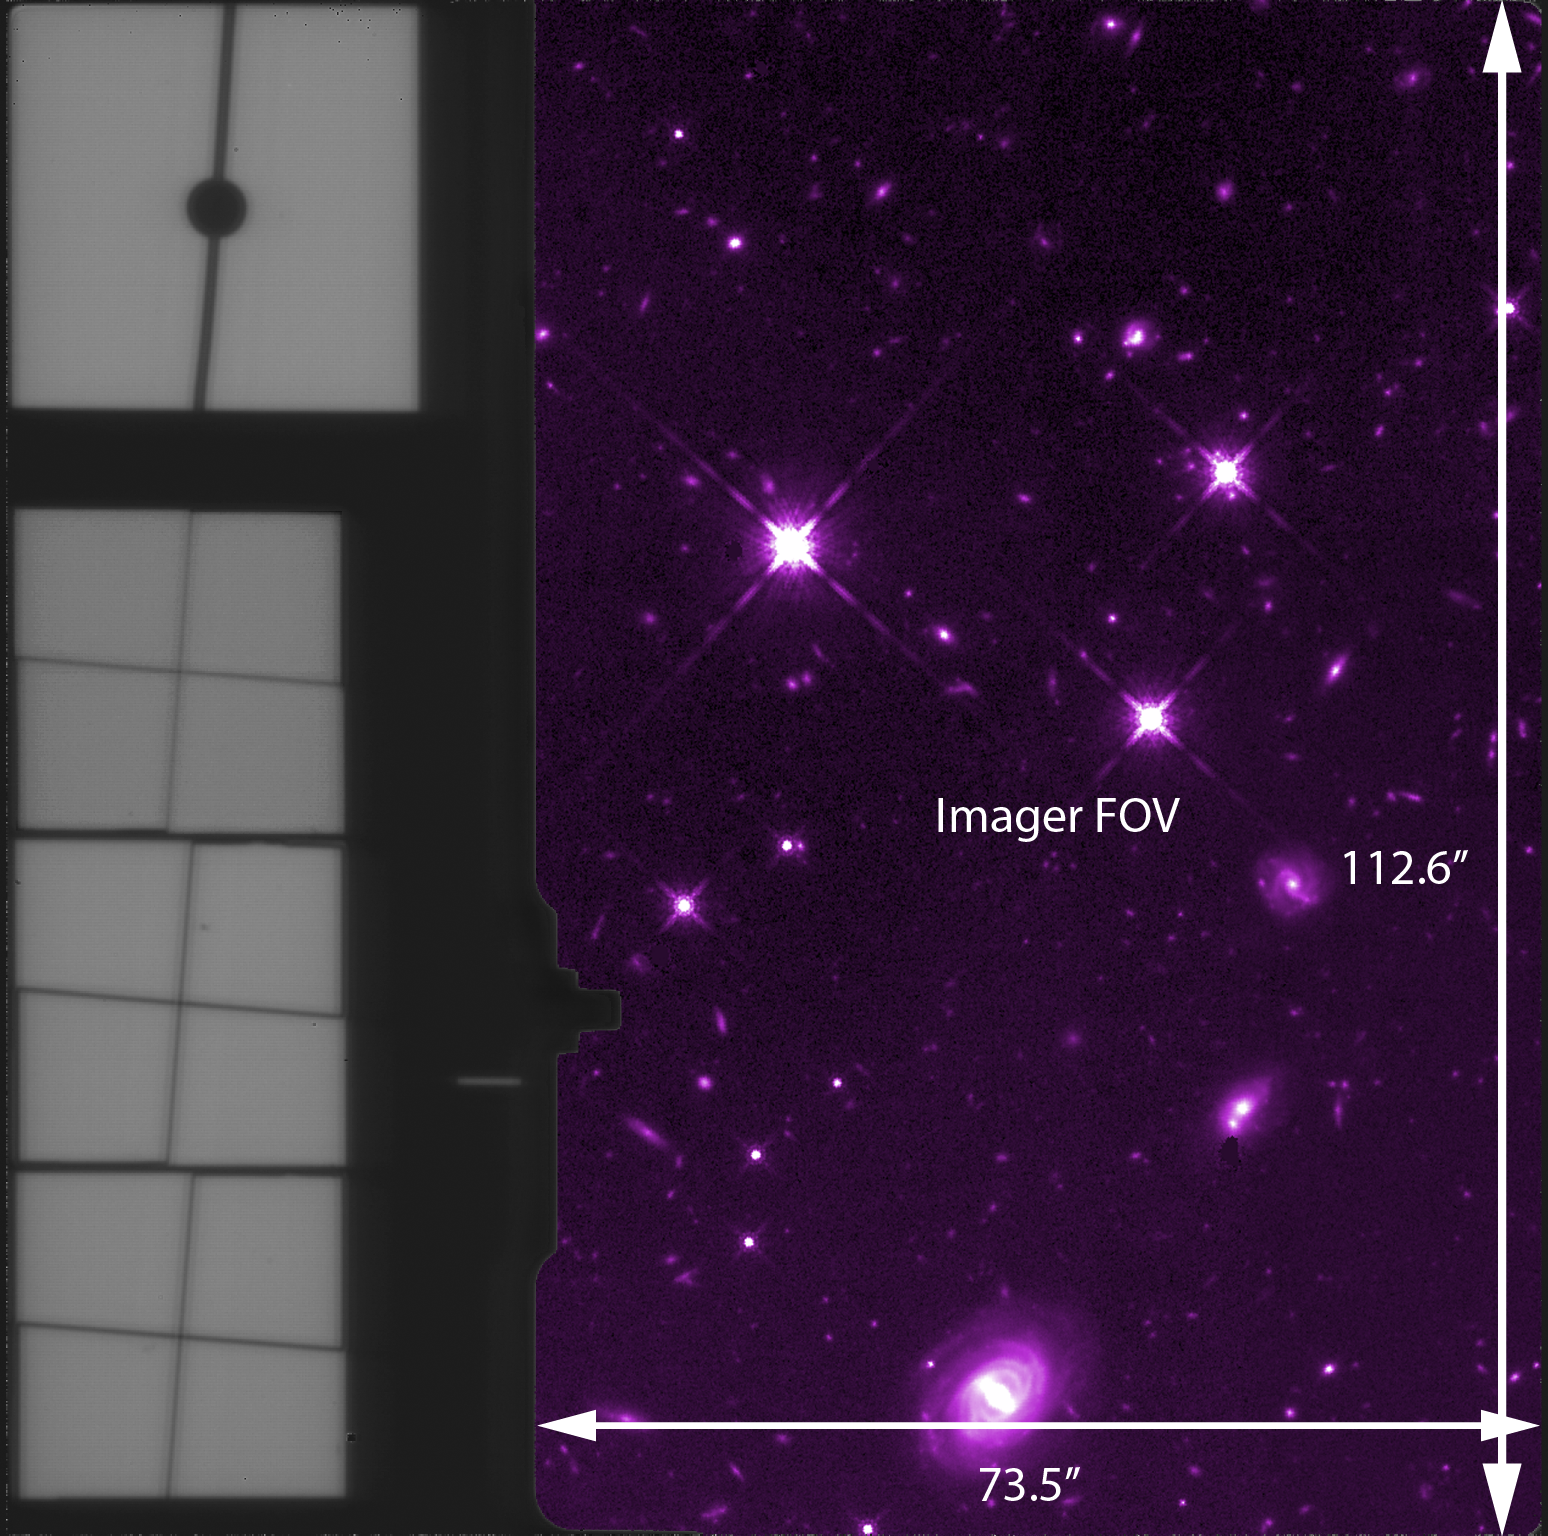  The imager focal plane, with the imaging FOV highlight on the right